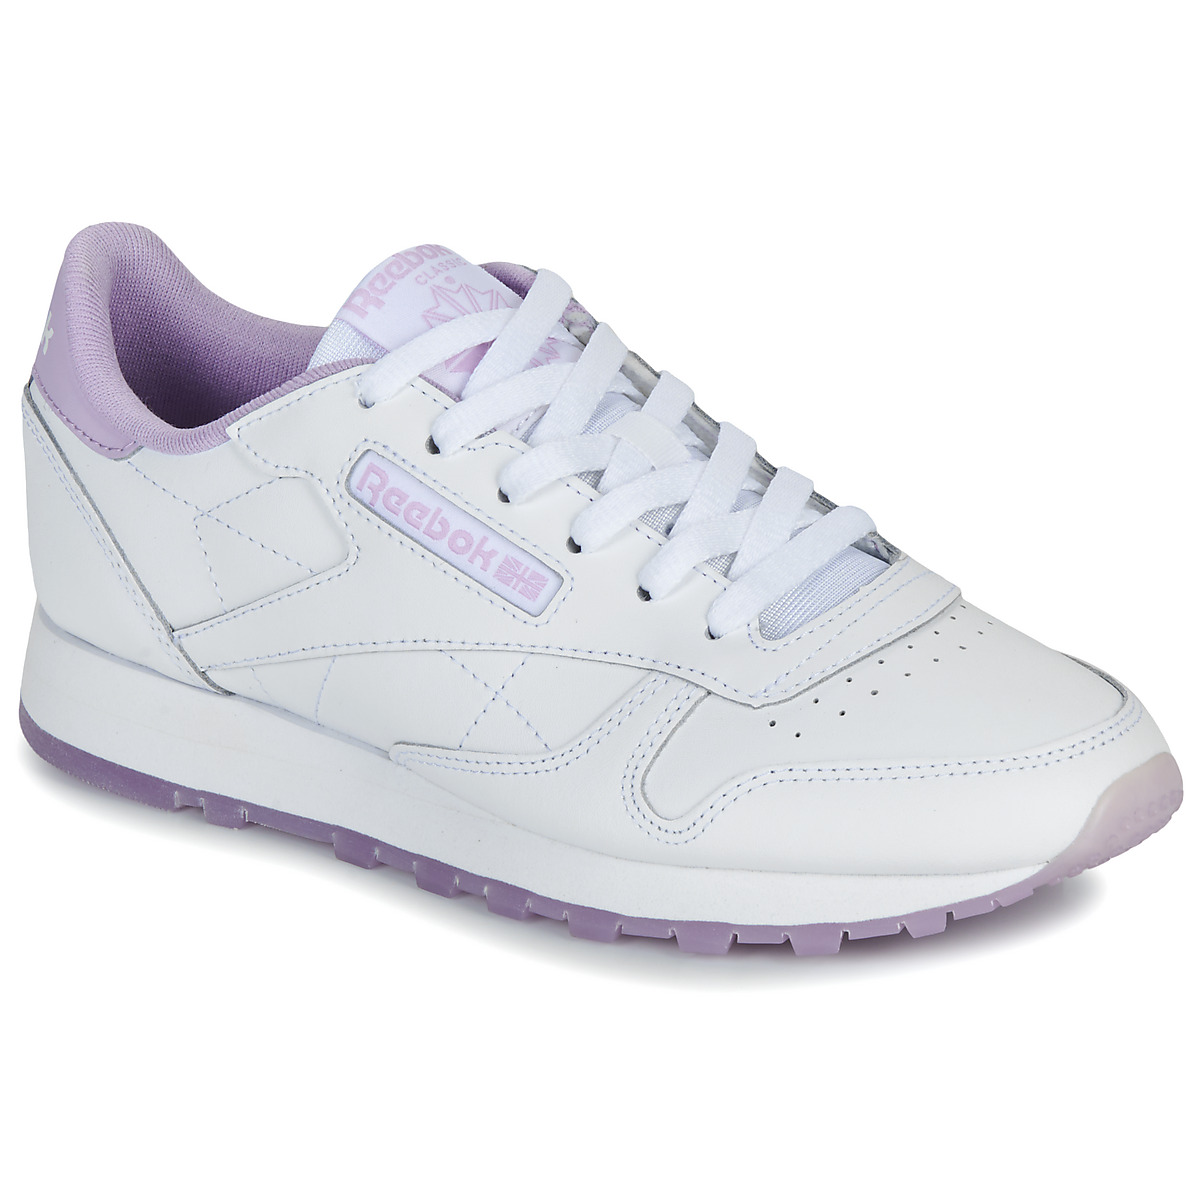 Xαμηλά Sneakers Reebok Classic CLASSIC LEATHER